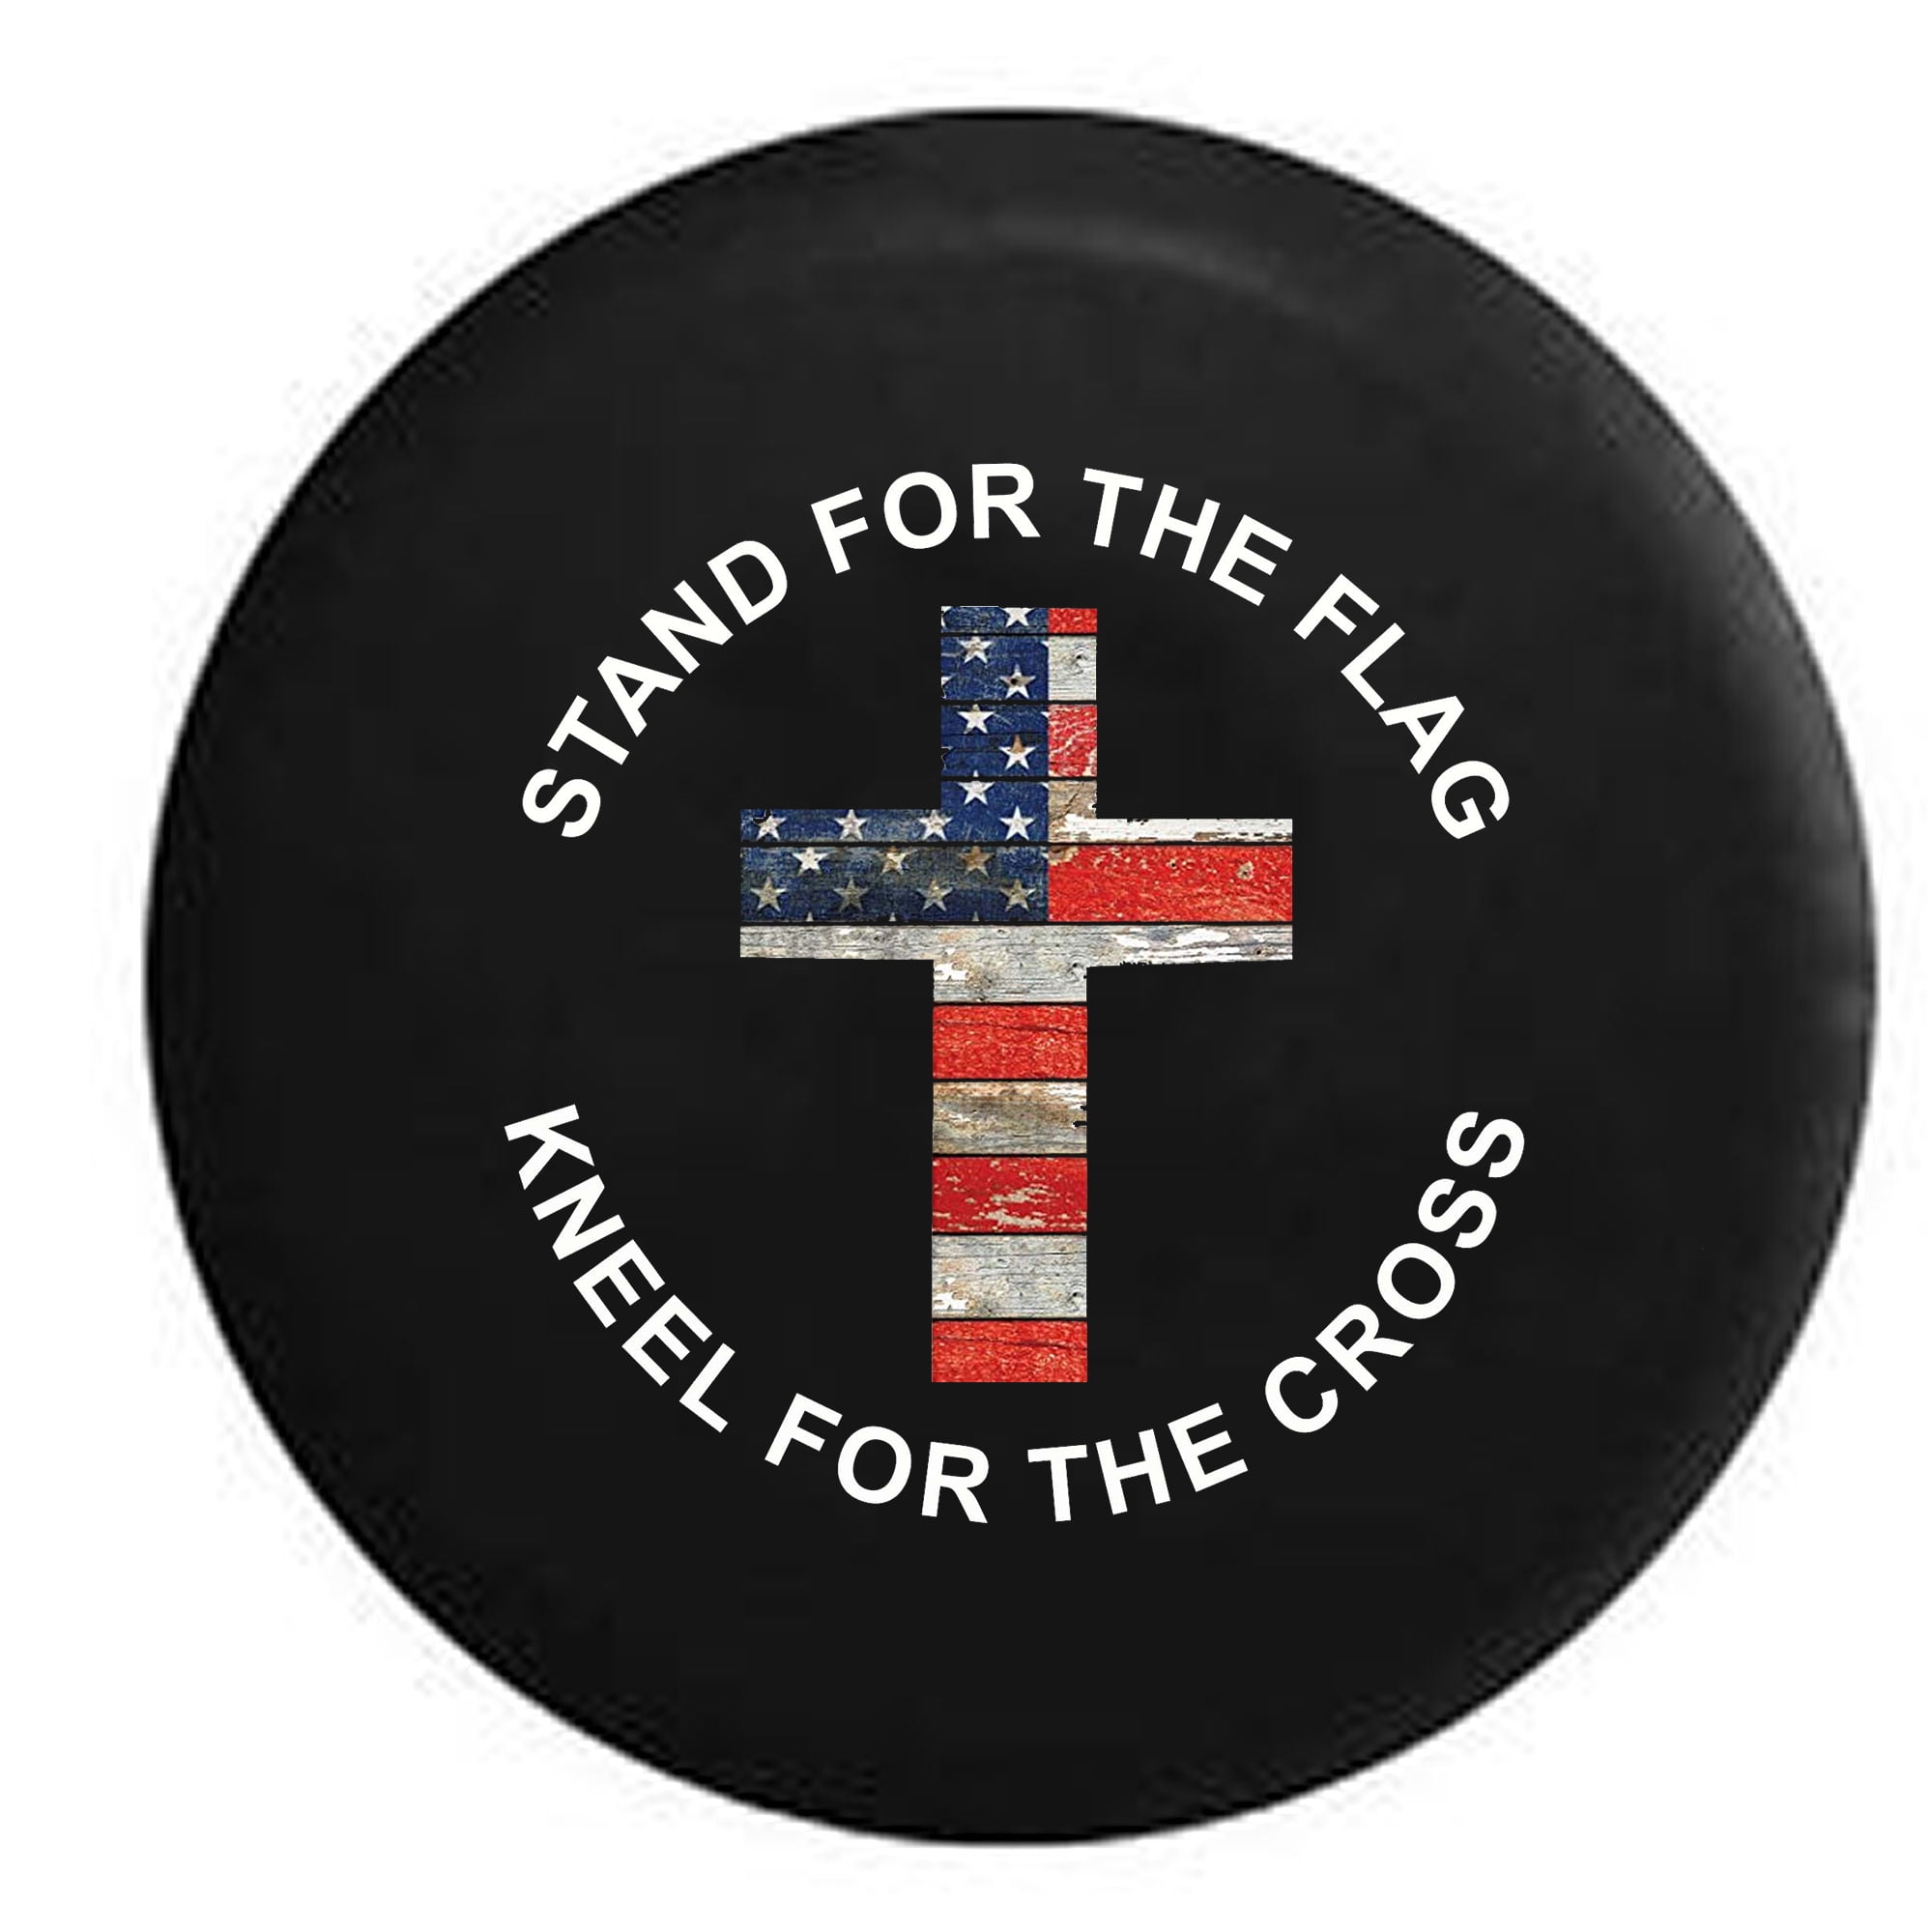 Juhucc I Stand for The Flag Kneel for The Cross Waterproof Dust-Proof Universal Wheel Tire Covers Fit for Trailer,SUV Truck and Many Vehicle Camper Accessories 